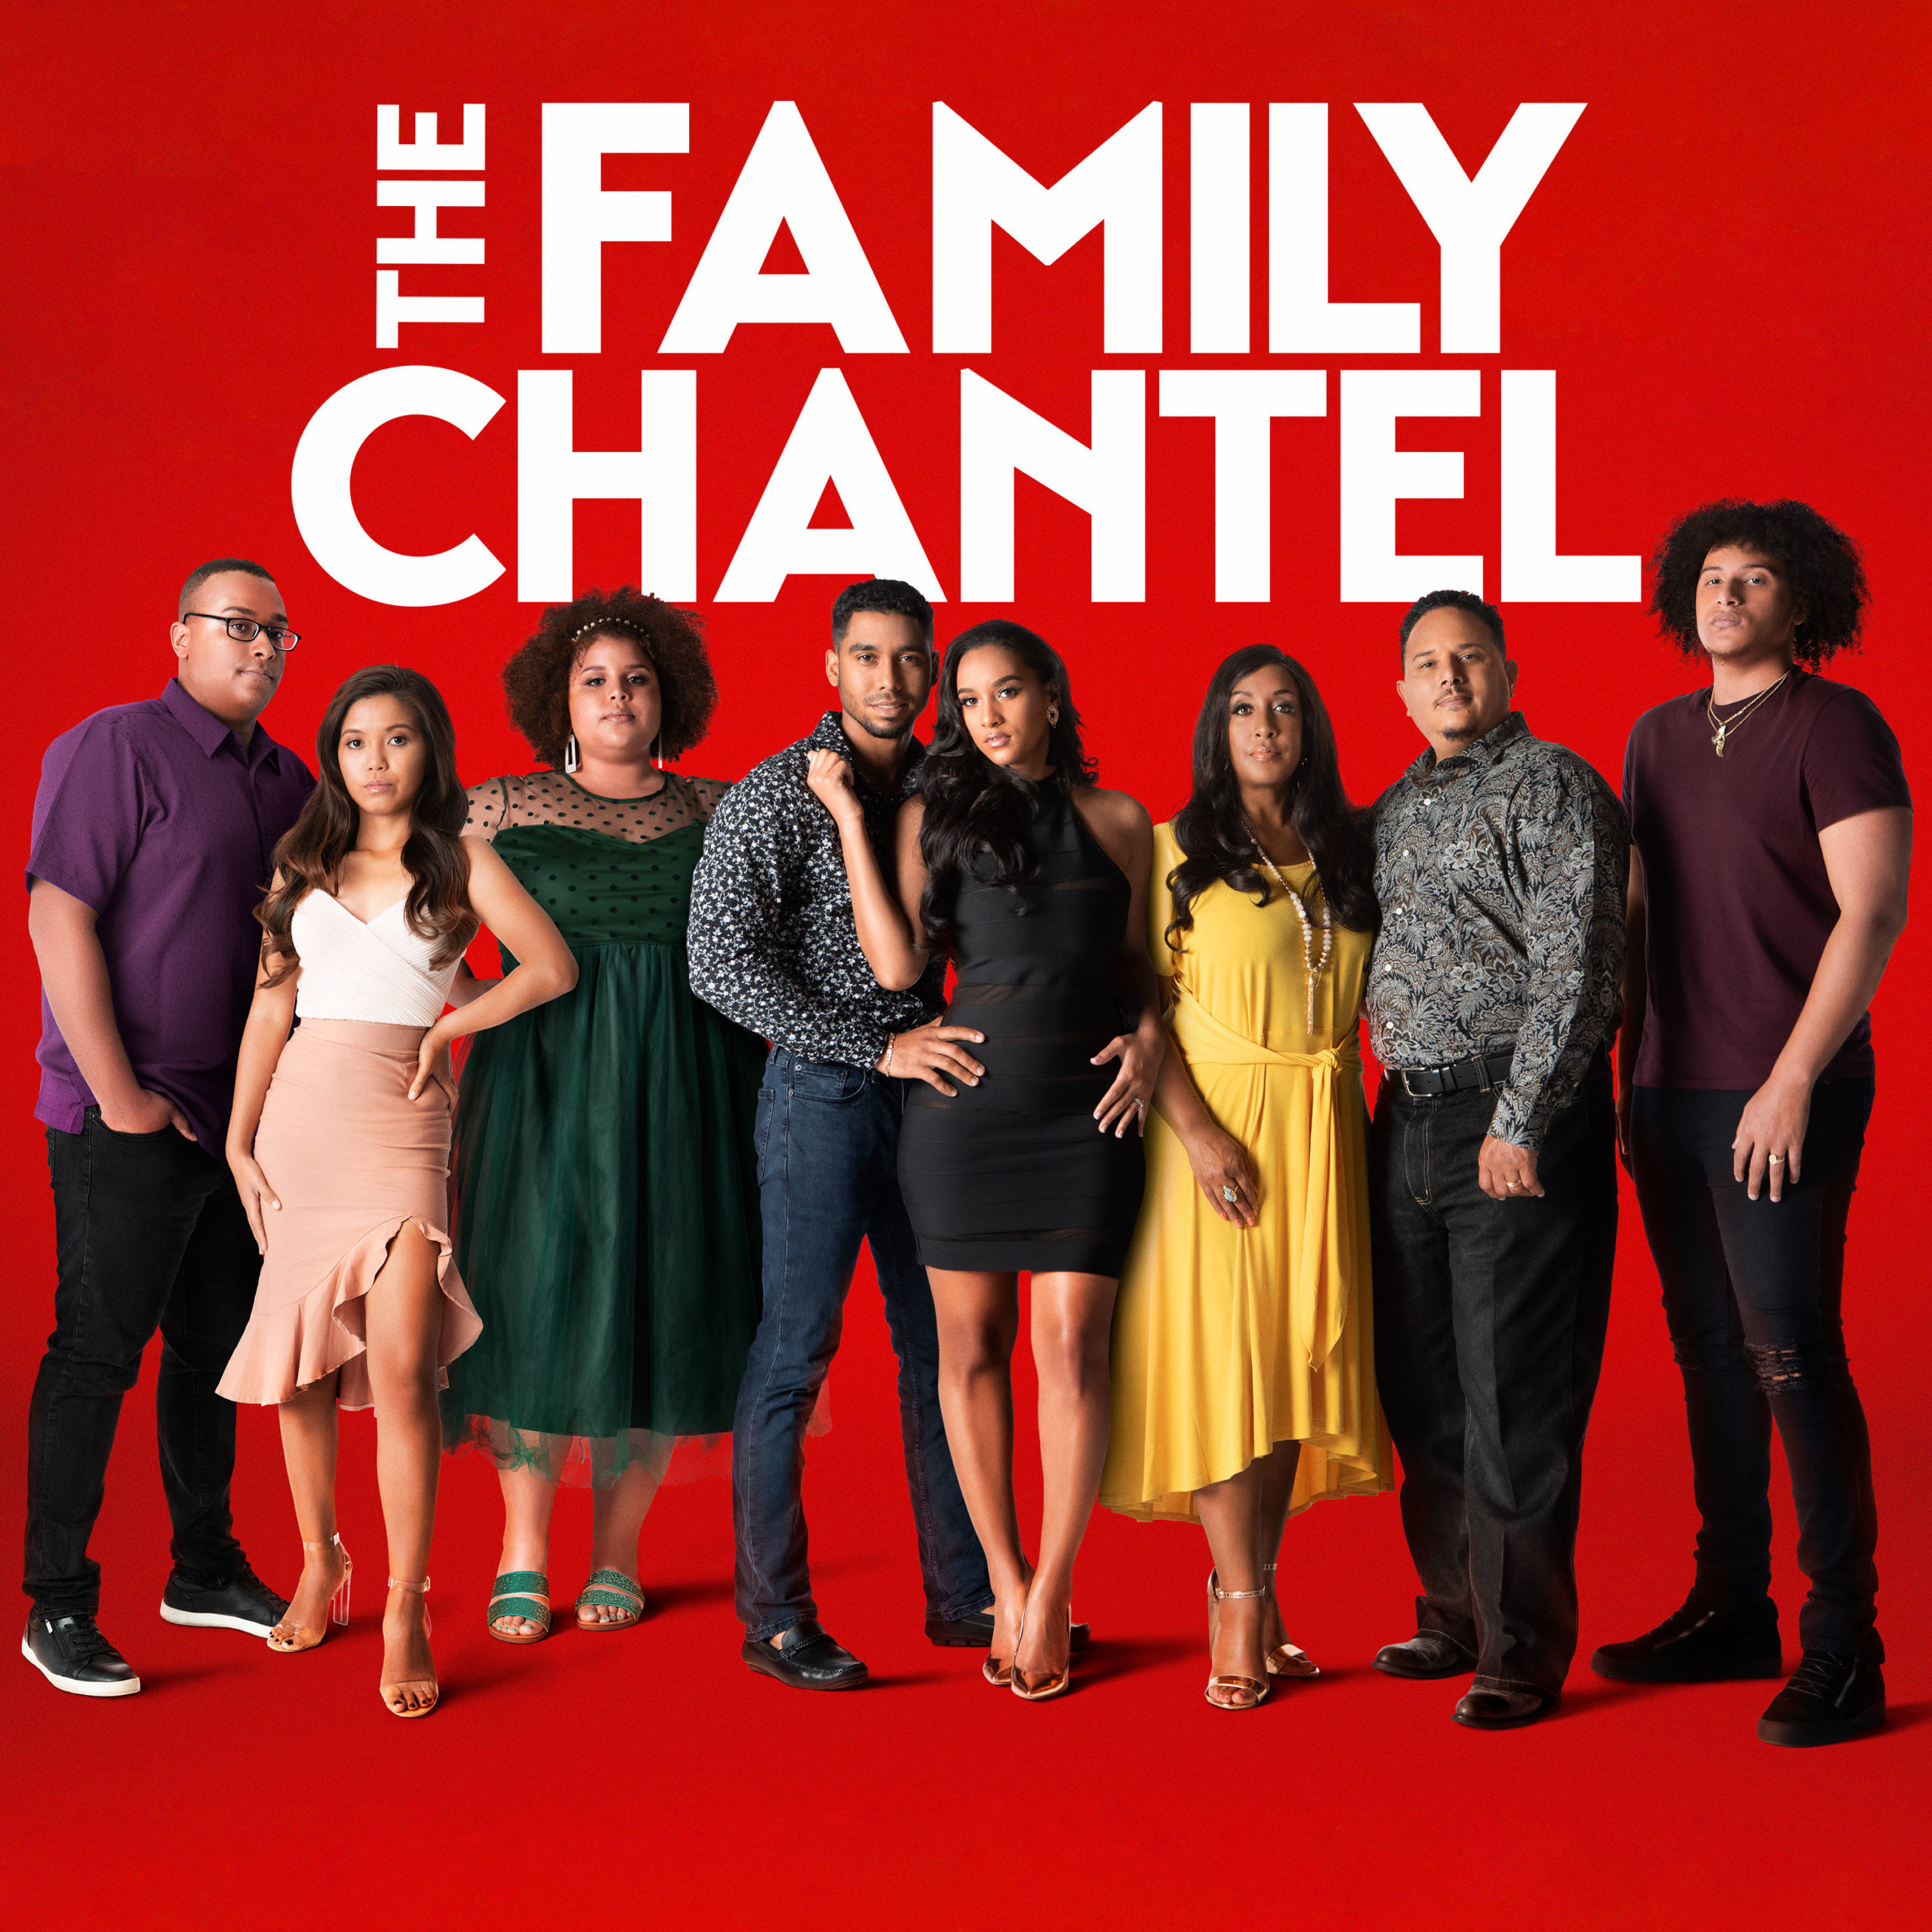 TLC The Family Chantel Season 3 Release Date Confirmed By The Network